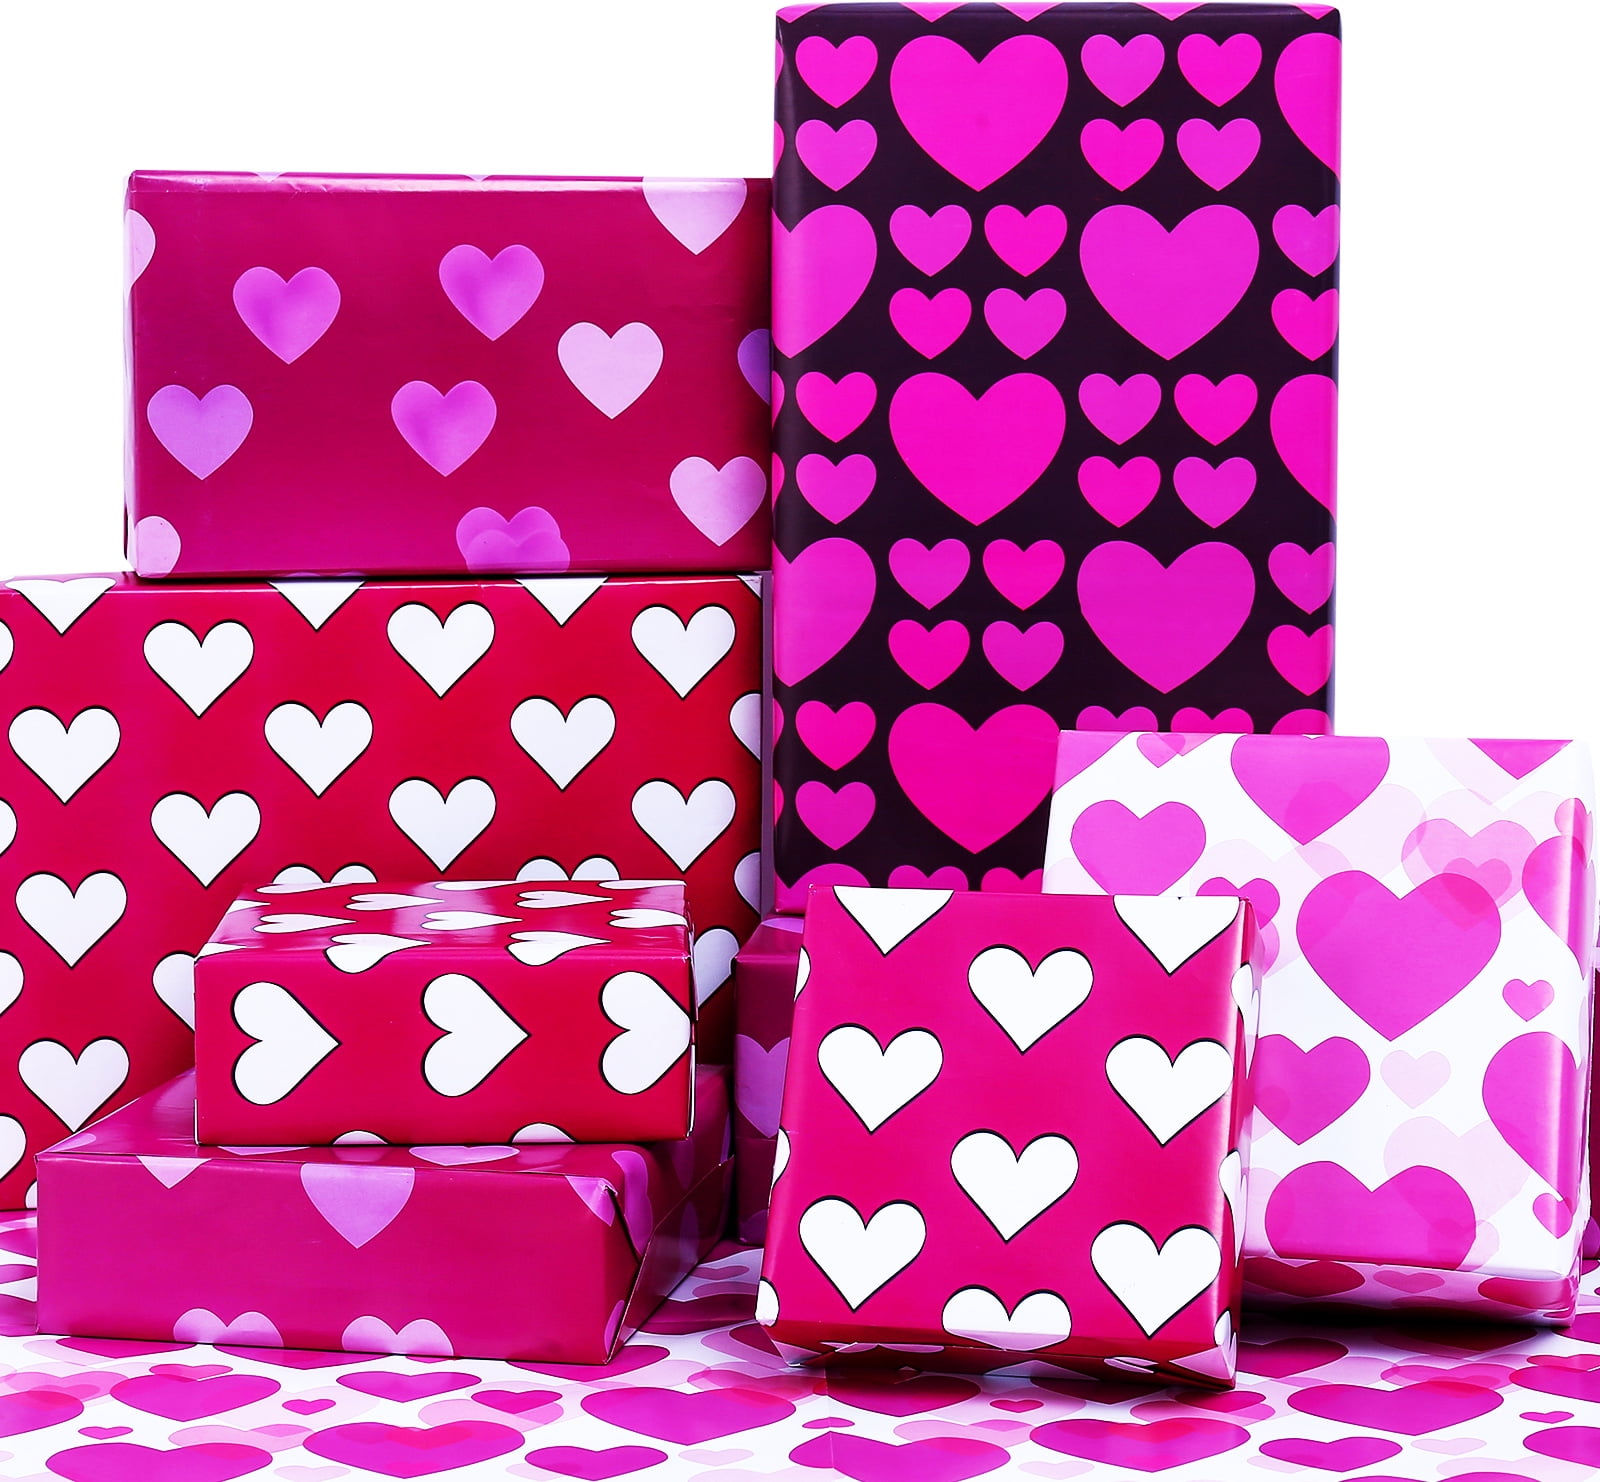  Whaline 120 Sheet Valentine's Day Tissue Paper Red Pink Gift  Wrapping Paper Heart Love Decorative Art Paper for DIY Crafts Wedding  Anniversary Baby Shower Birthday Gifts Decor Supplies : Health 